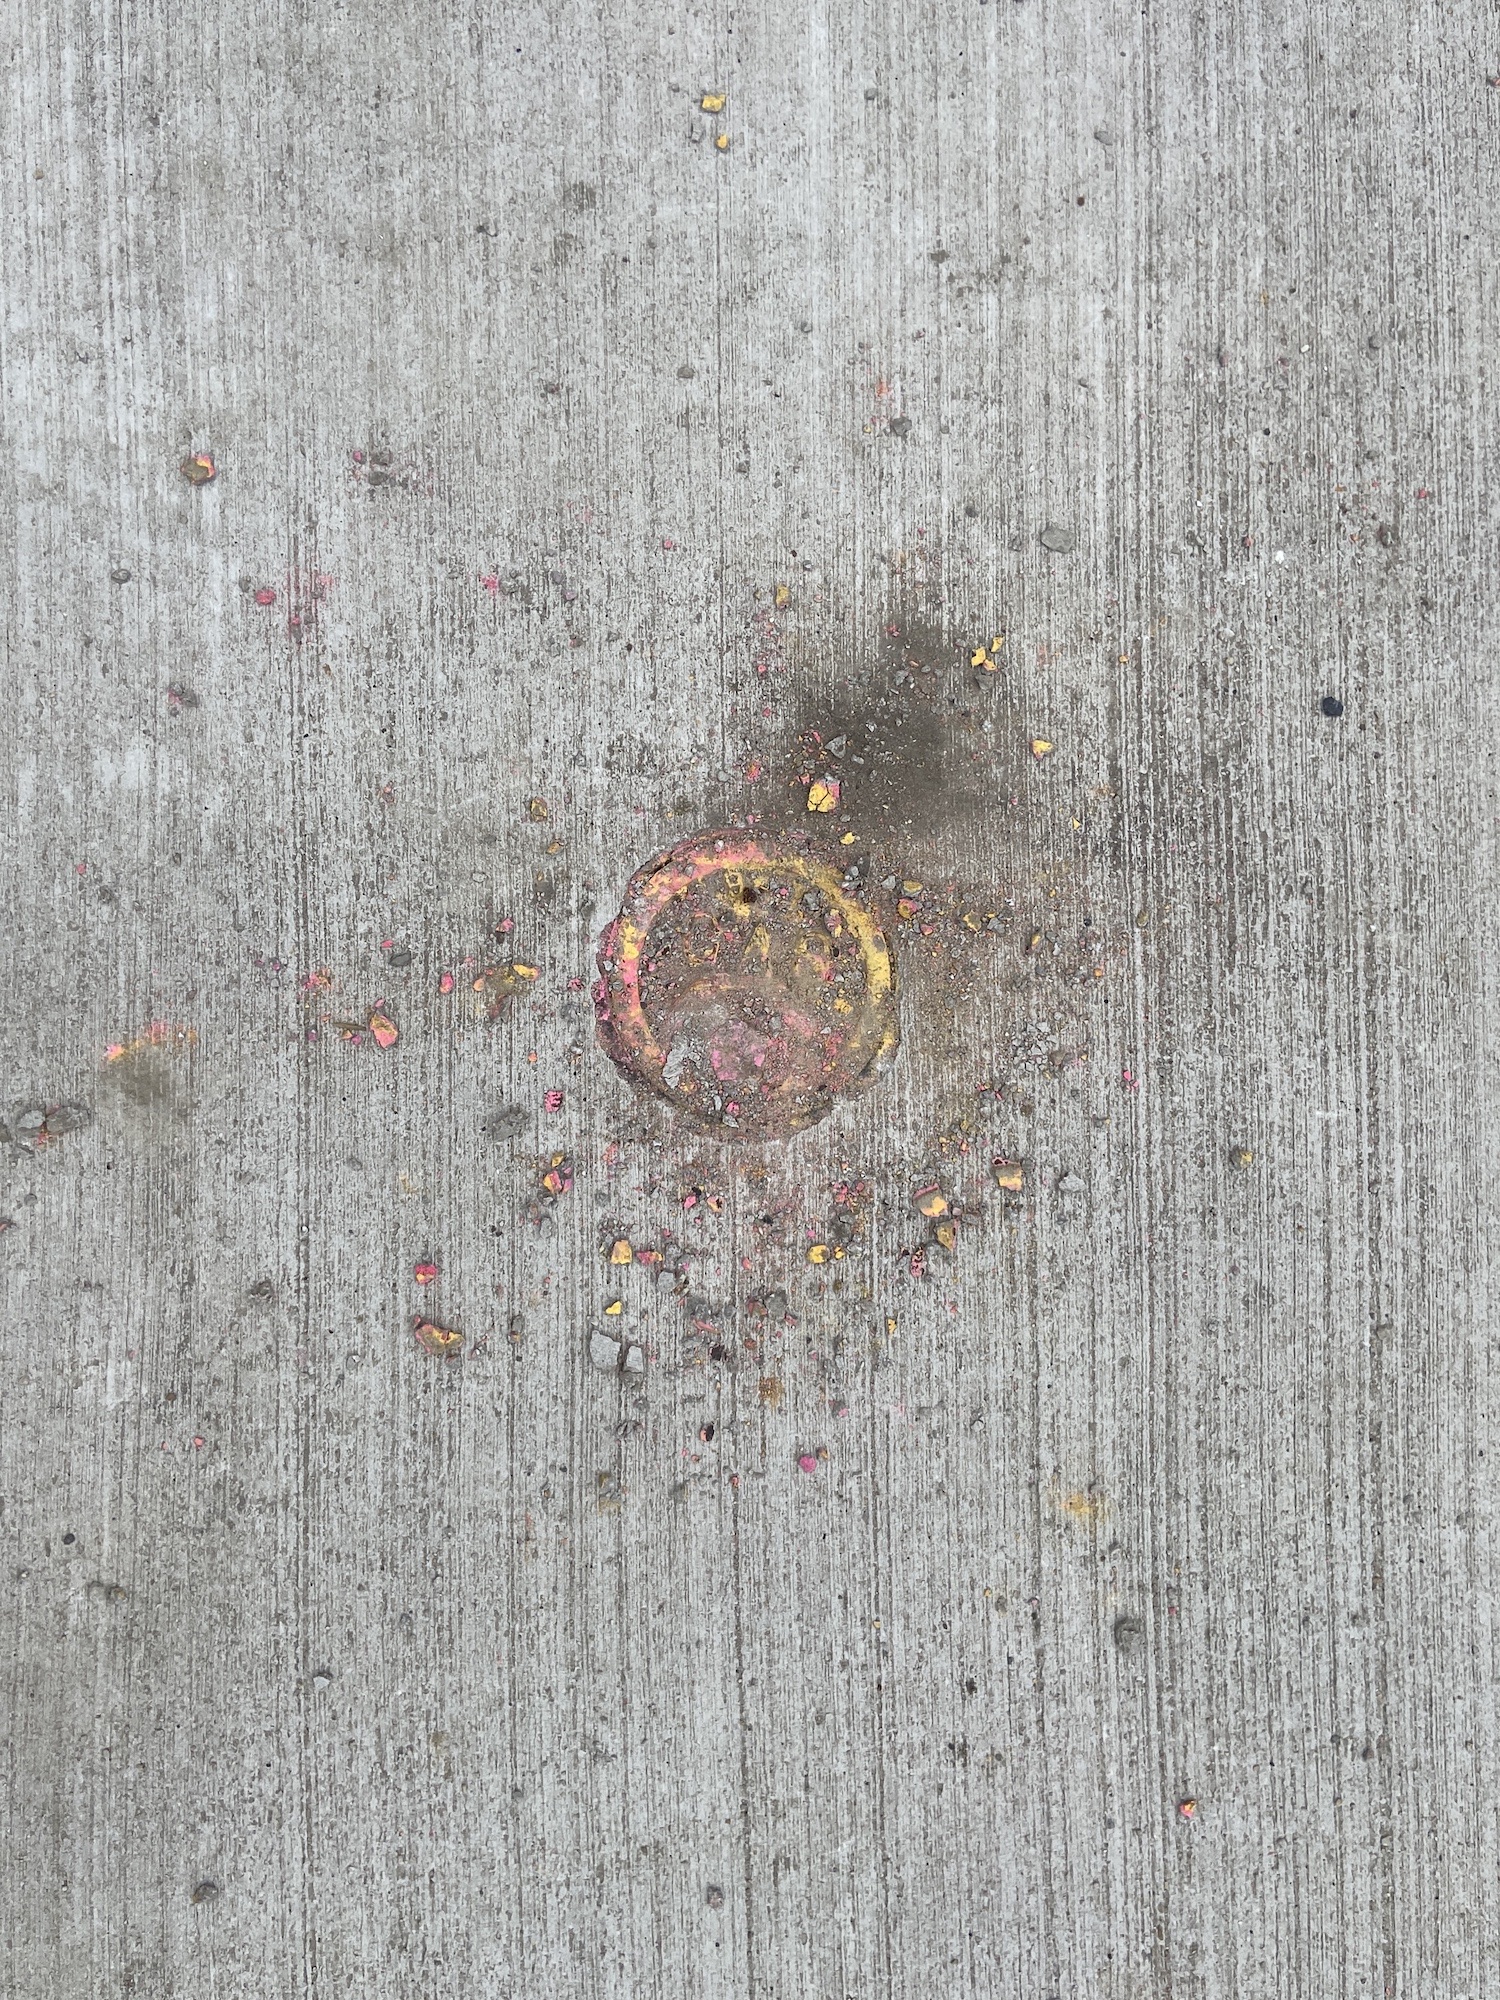 A gas shutoff cap in the sidewalk with yellow and pink pastel debris around it.